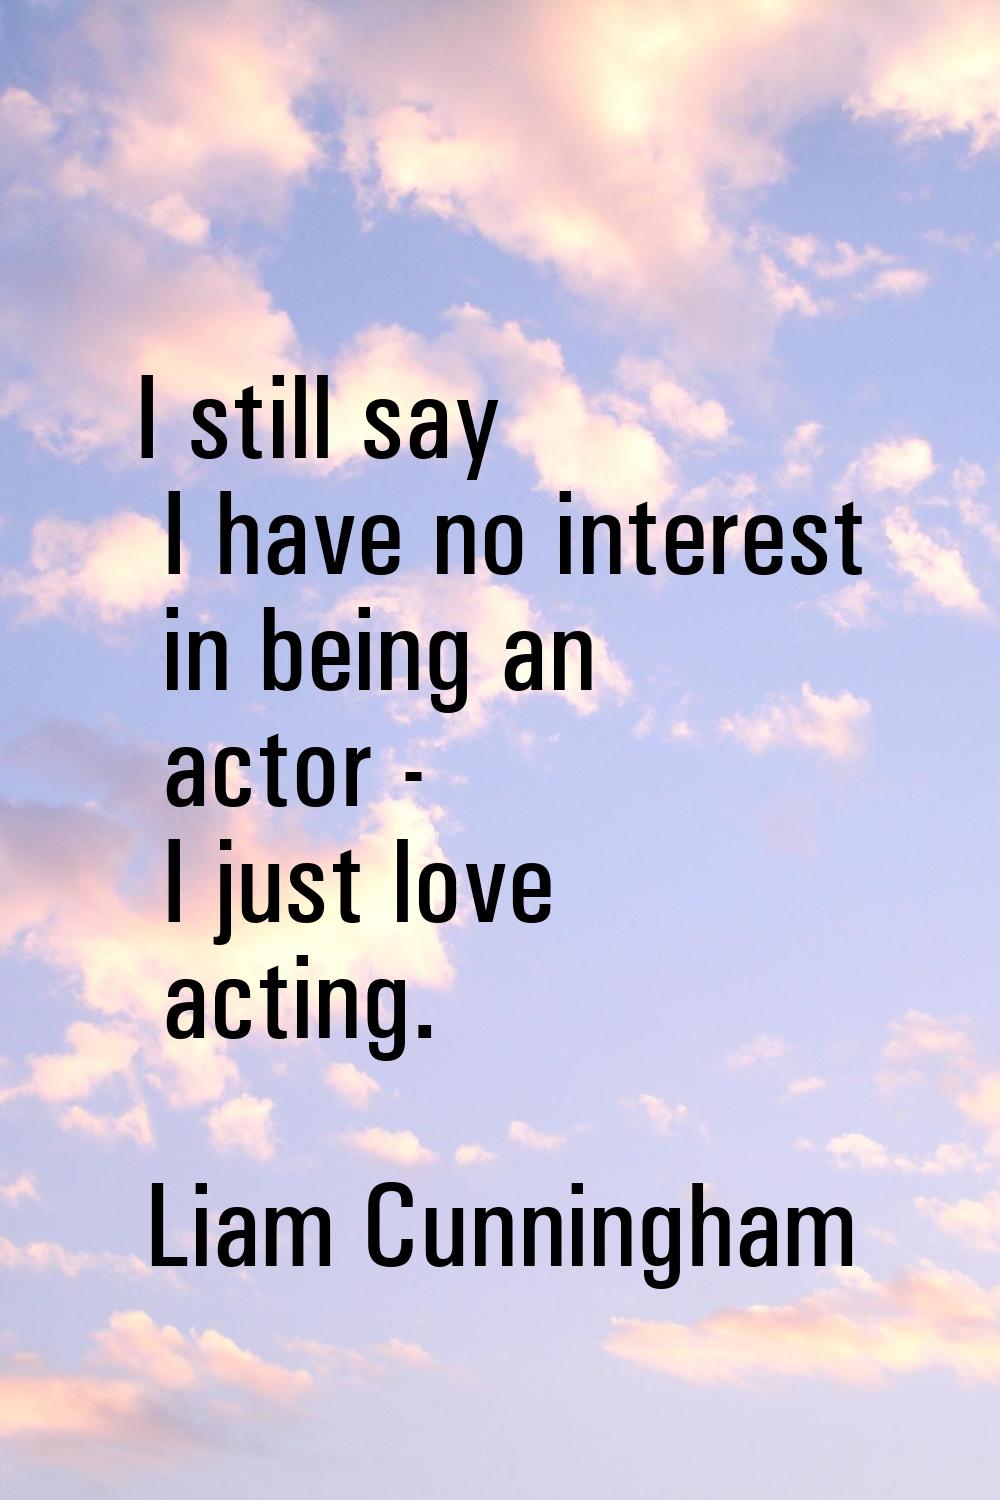 I still say I have no interest in being an actor - I just love acting.